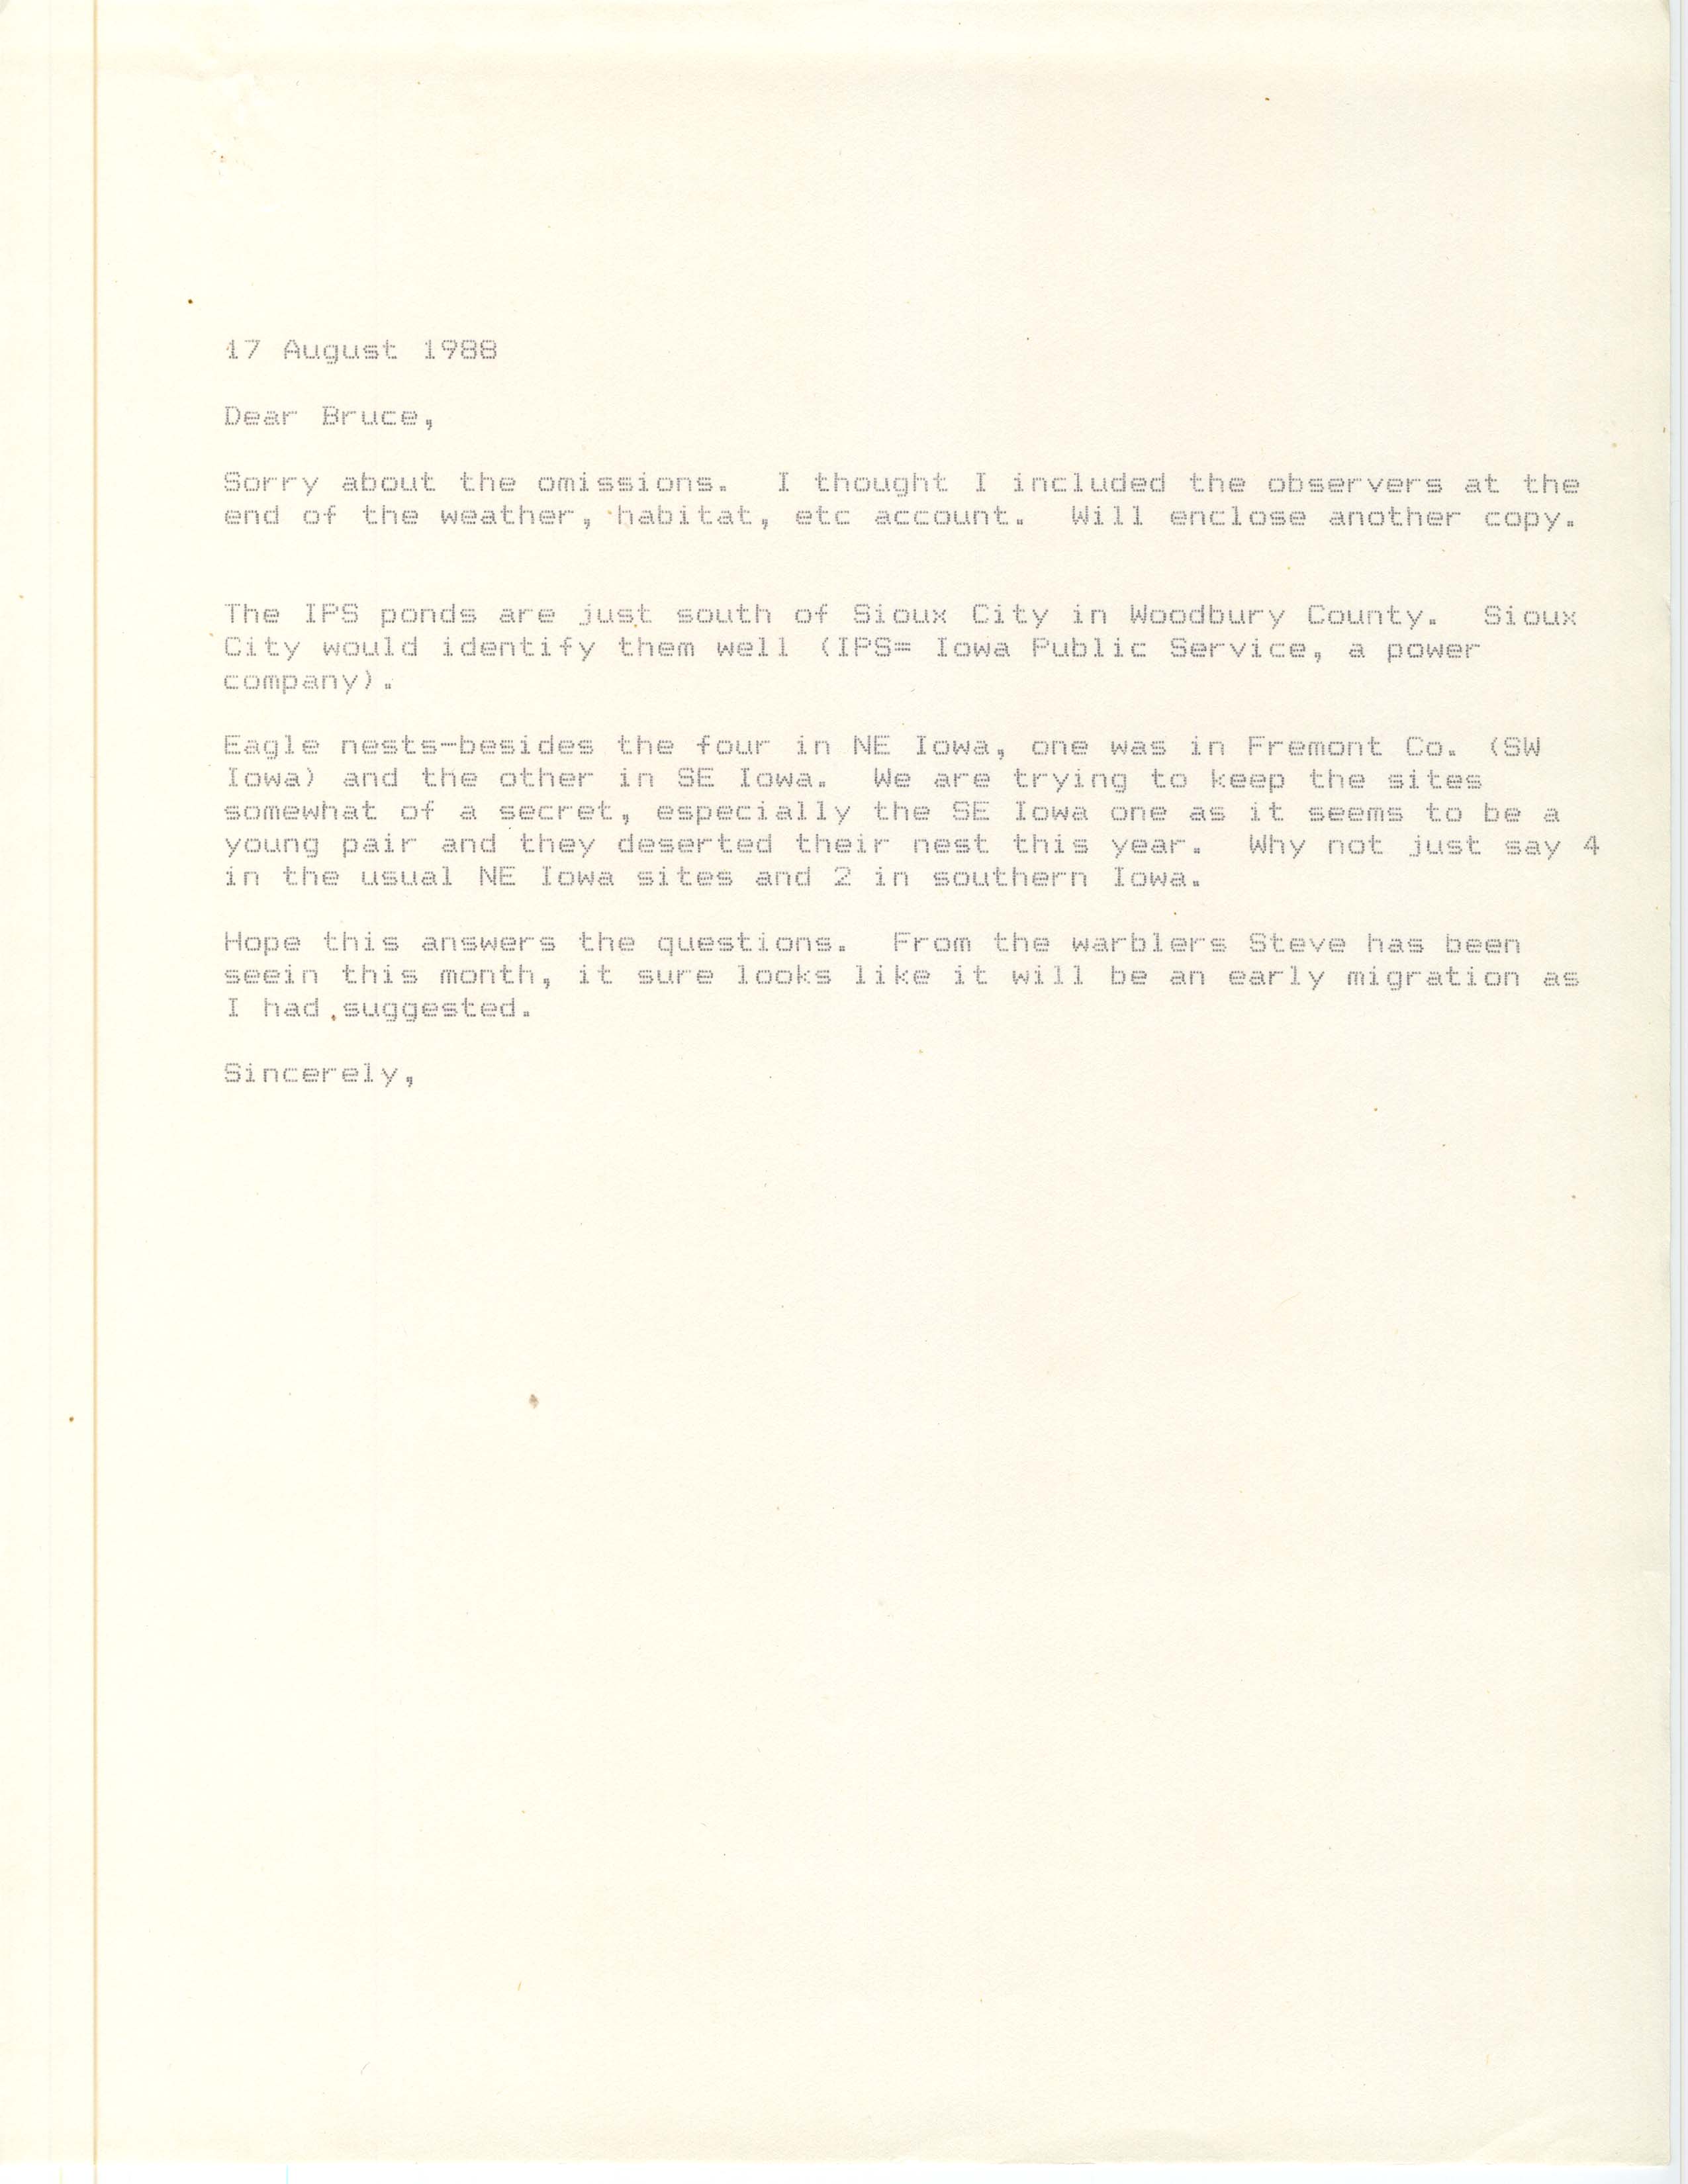 James J. Dinsmore letter to Bruce G. Peterjohn with additional summer field note information, August 17, 1988